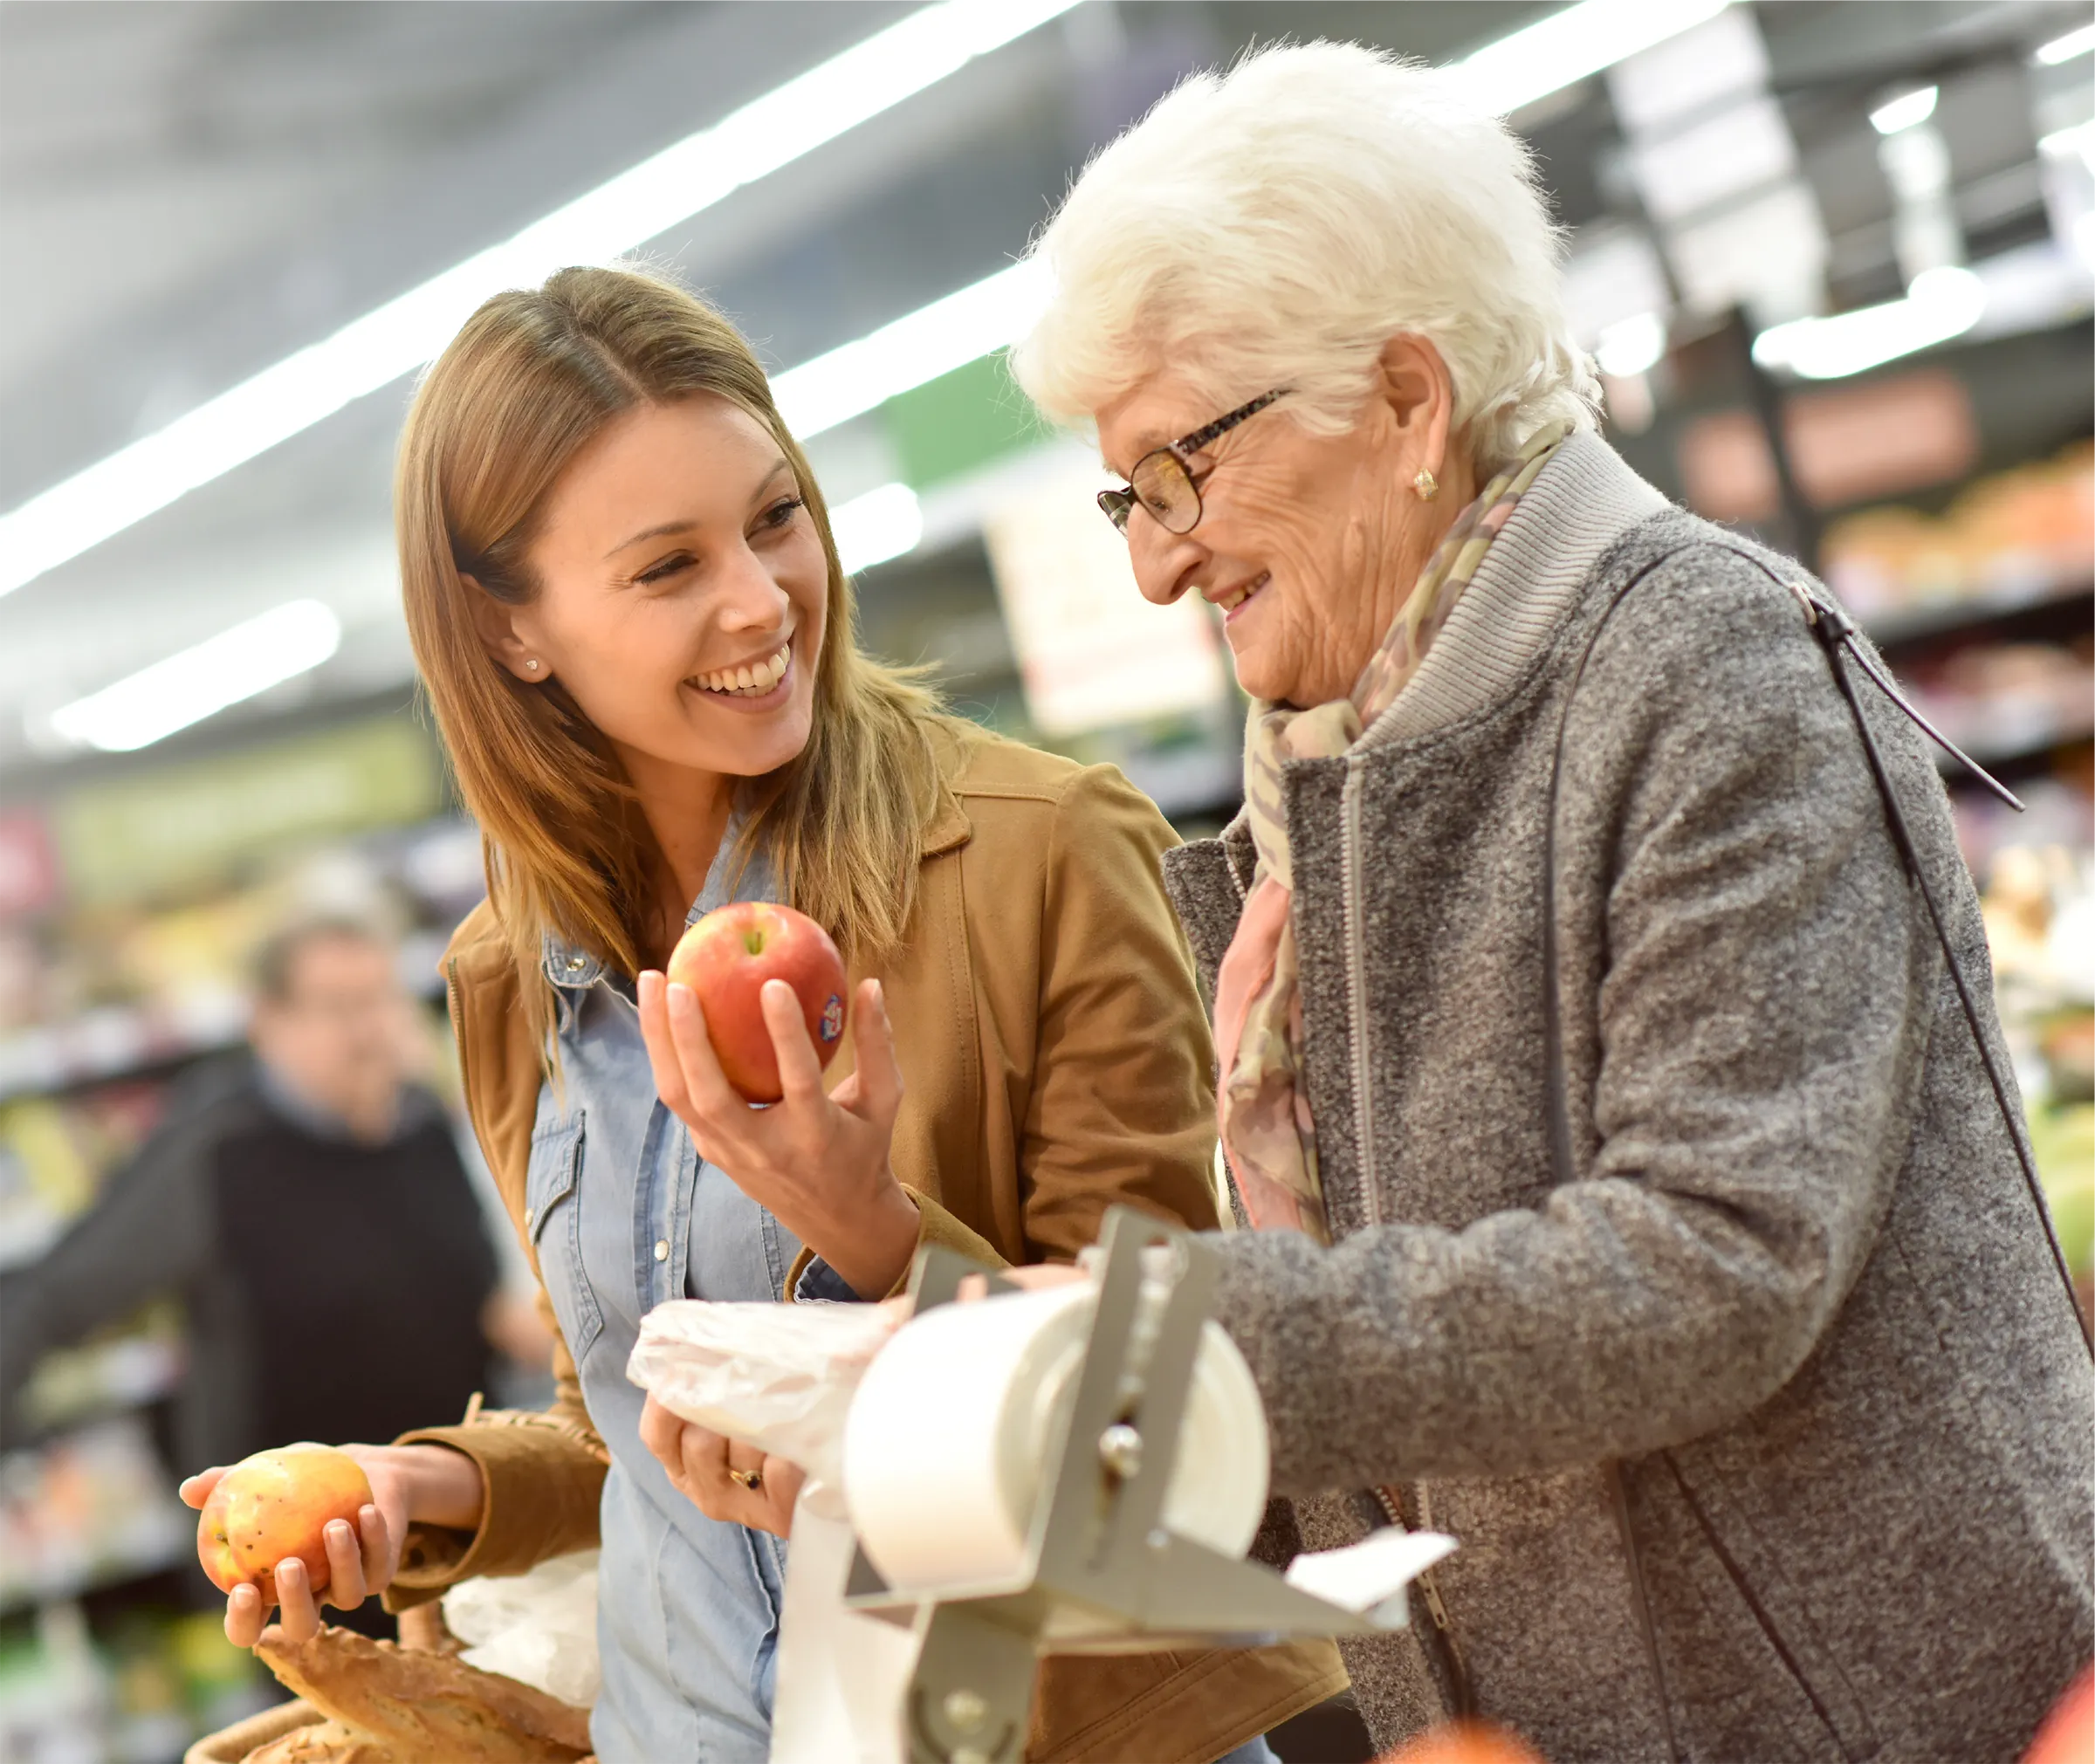 woman assisting senior woman with produce